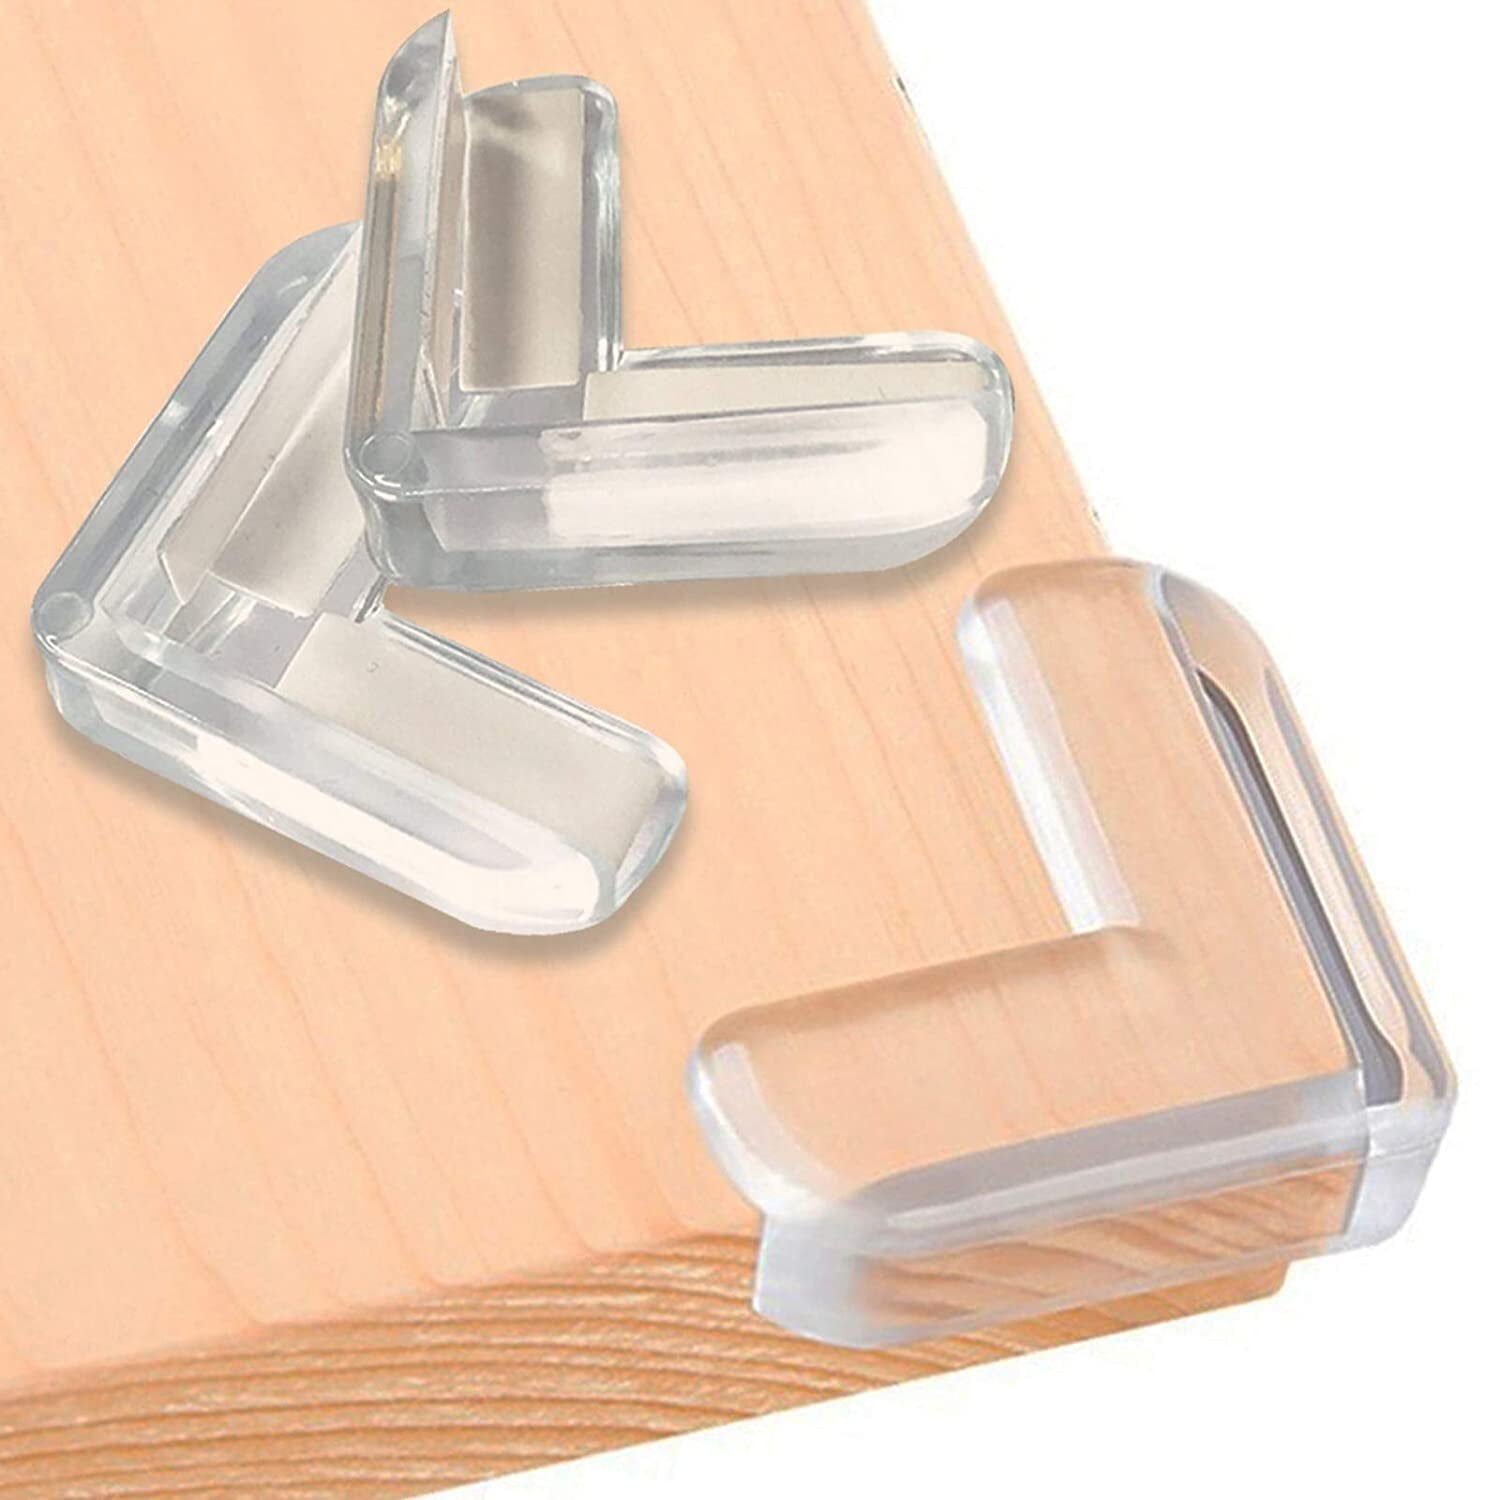 Table Corner Protector Guards for Baby Satety - Furniture Corner Guard &  Edge Safety Bumpers, Cover Sharp Furniture,Table Edges and Cabinets